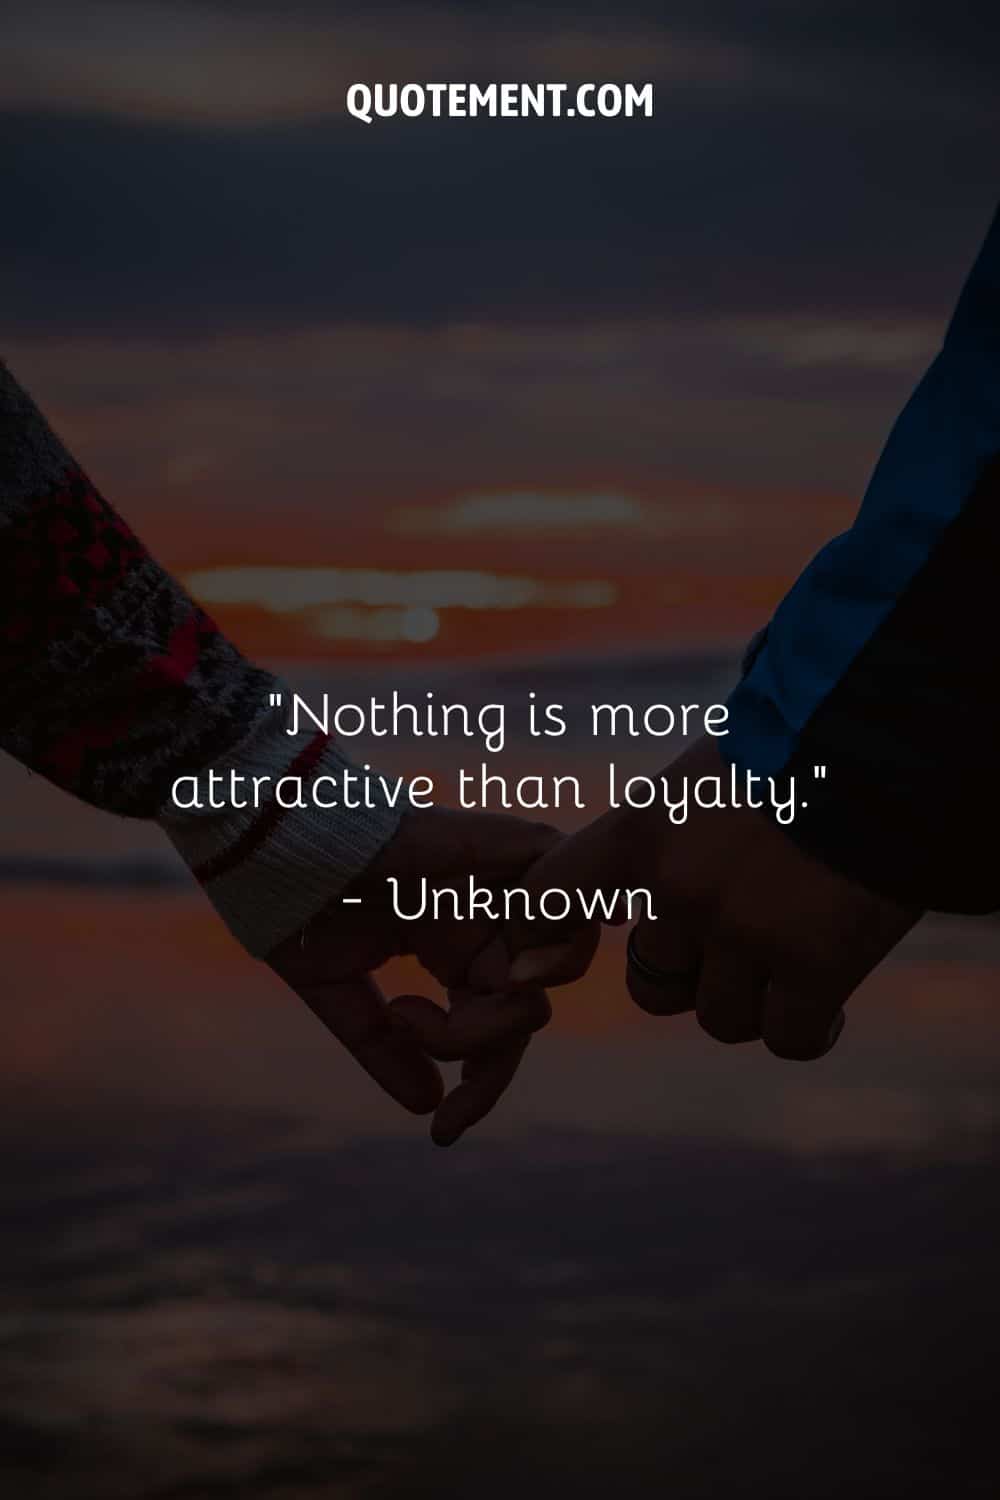 “Nothing is more attractive than loyalty.” — Unknown